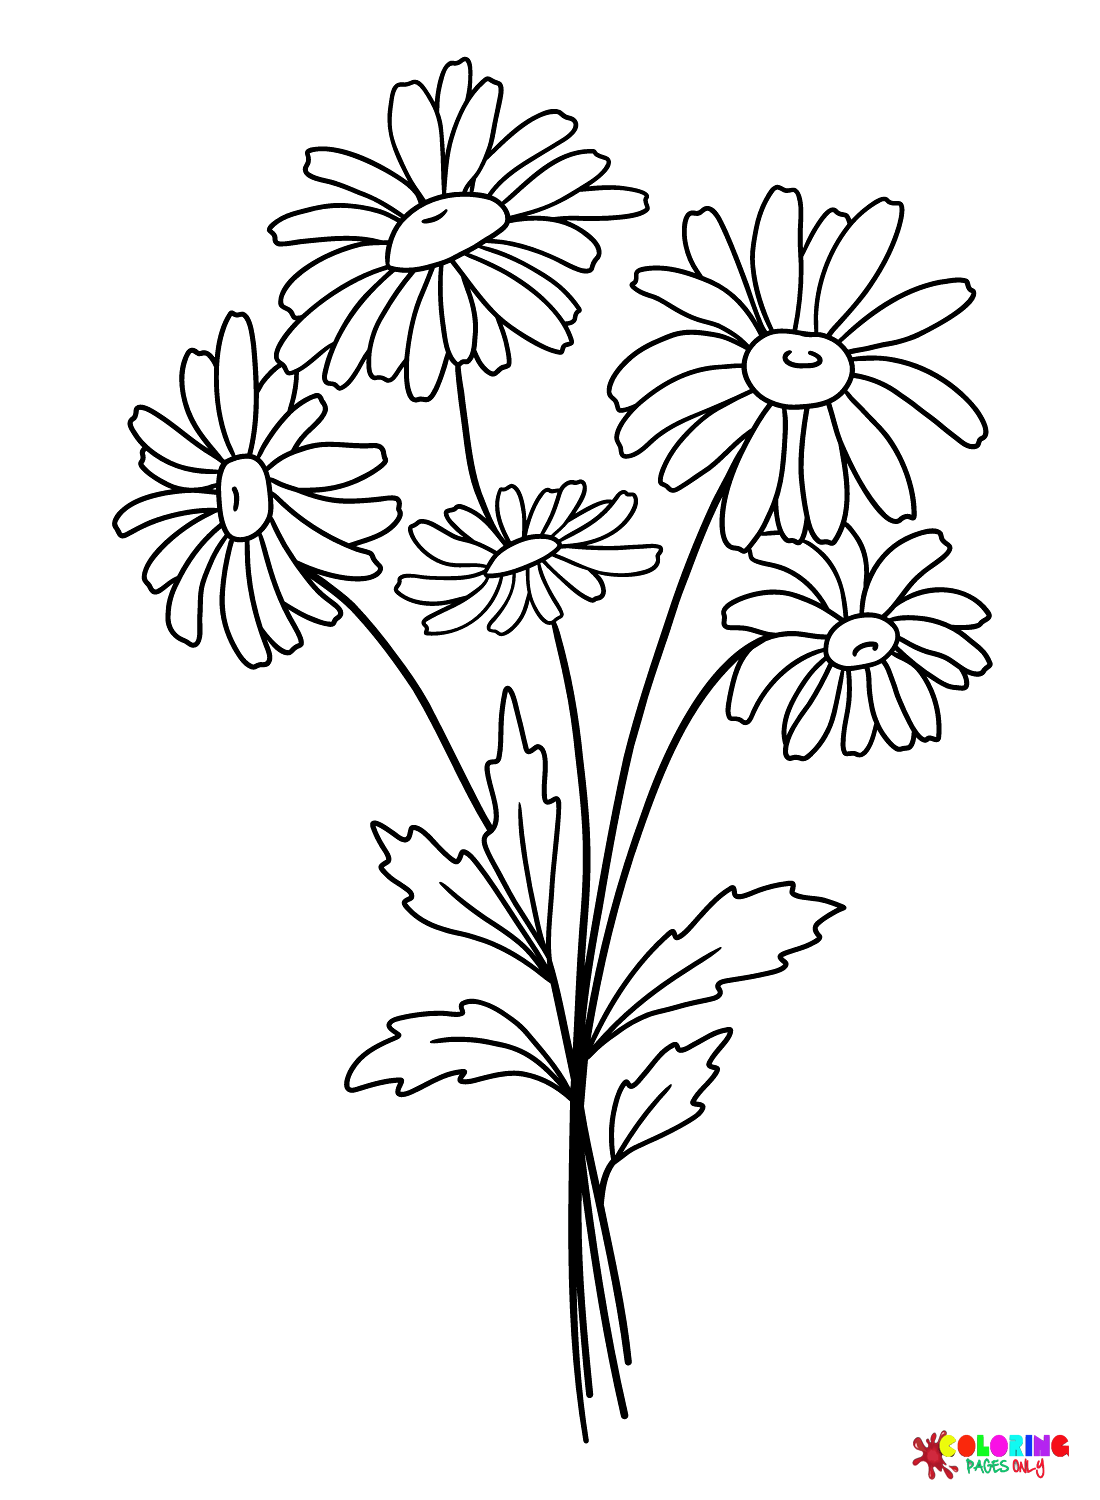 Free Daisy Coloring Page